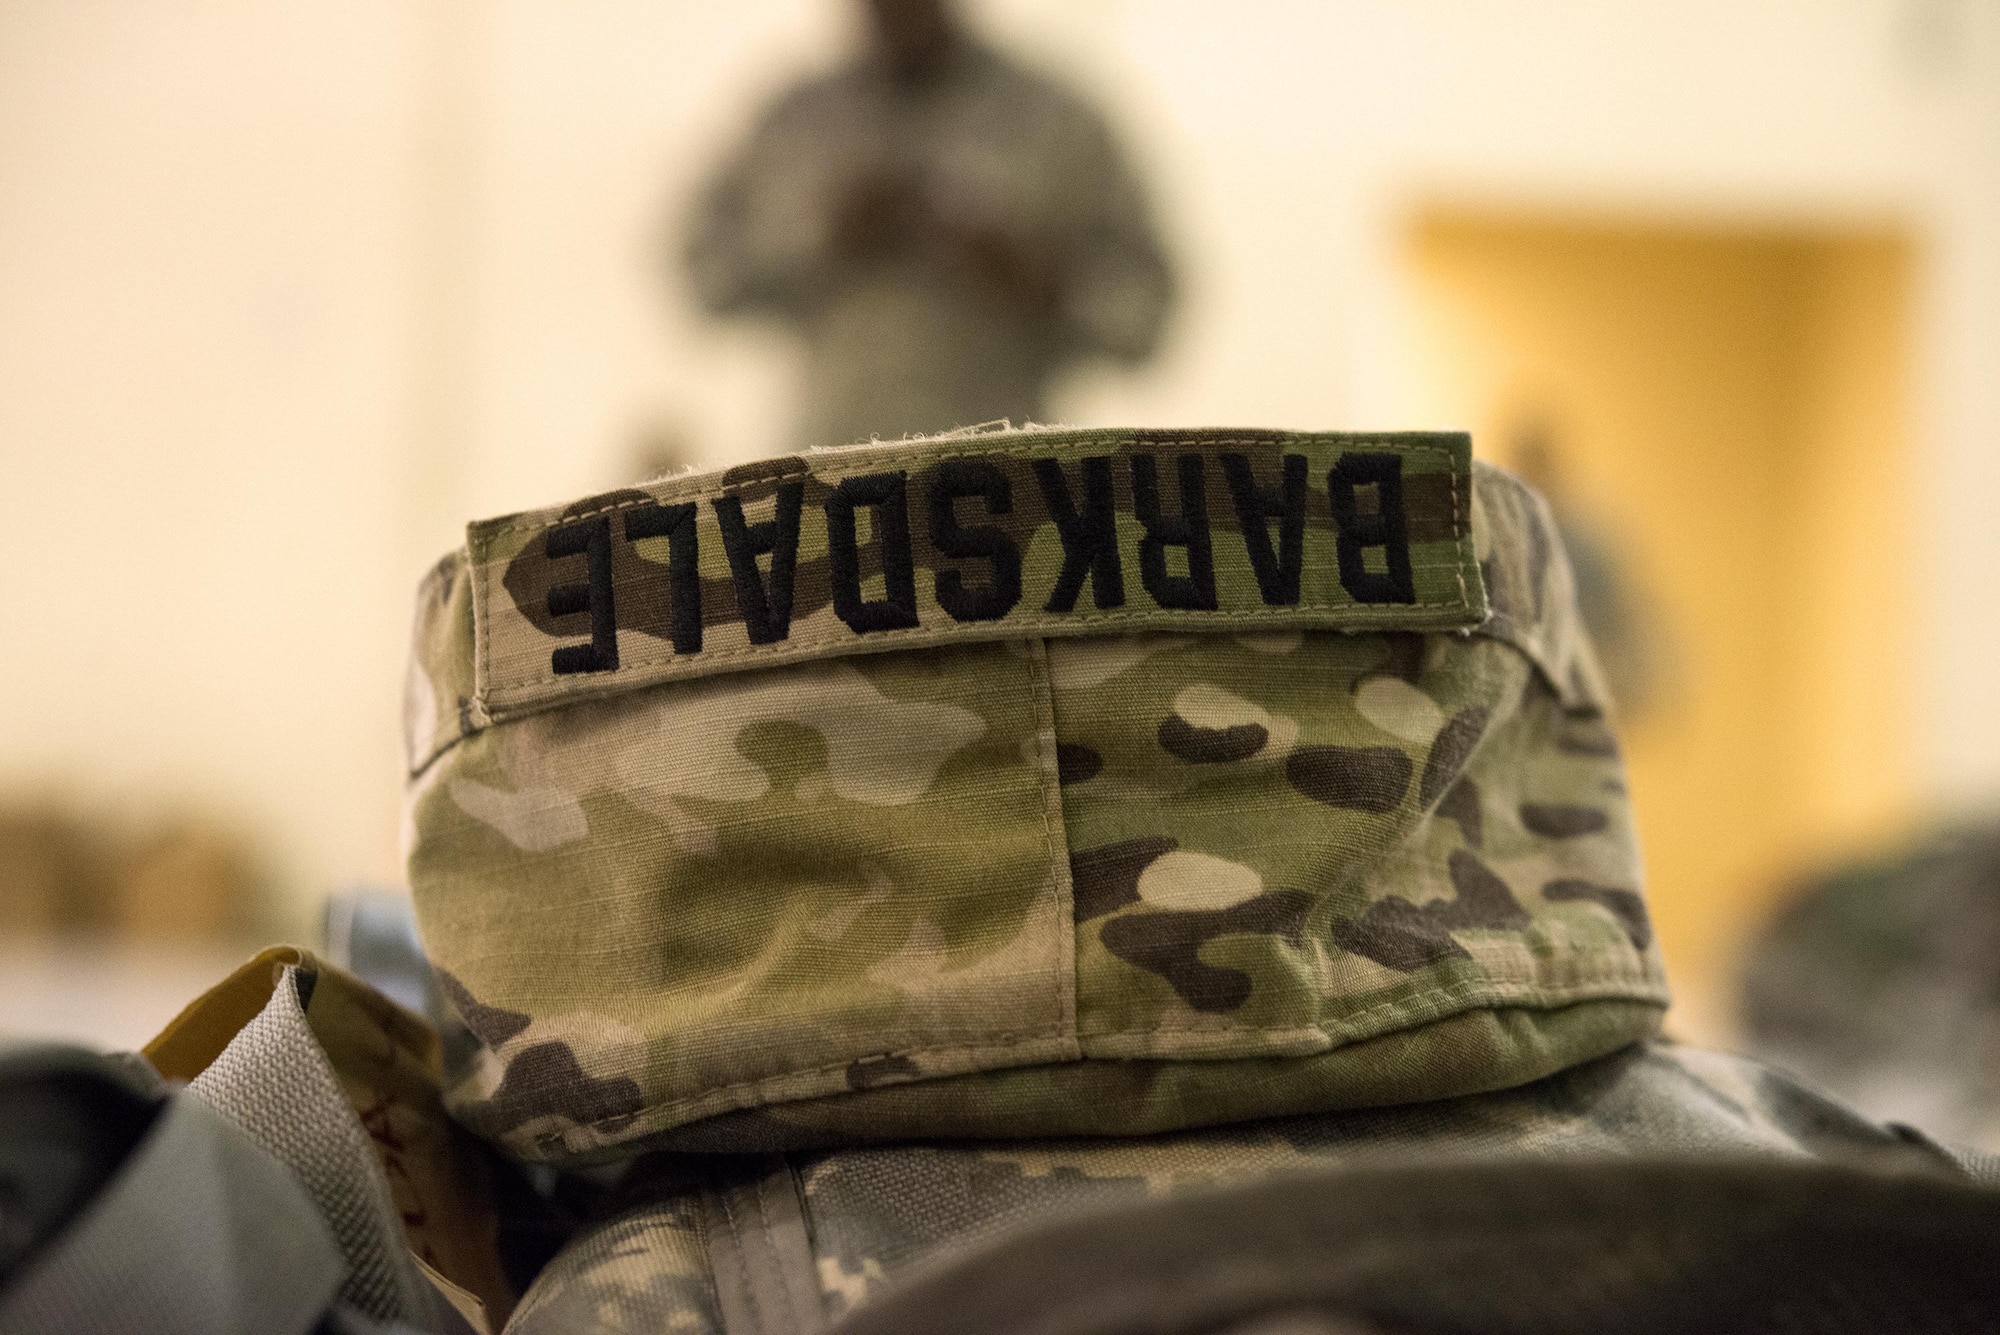 A Georgia Army National Guardsman’s cover rests on top of his gear, Sept. 13, 2017, at Moody Air Force Base, Ga. Units from the 48th Infantry Brigade Combat Team and Joint Task Force 781st Chemical, Radiological, Nuclear, Explosive Response Package stayed the night at Moody before heading to Orlando, Fla., to provide humanitarian relief for the victims of Hurricane Irma. (U.S. Air Force photo by Airman 1st Class Erick Requadt)